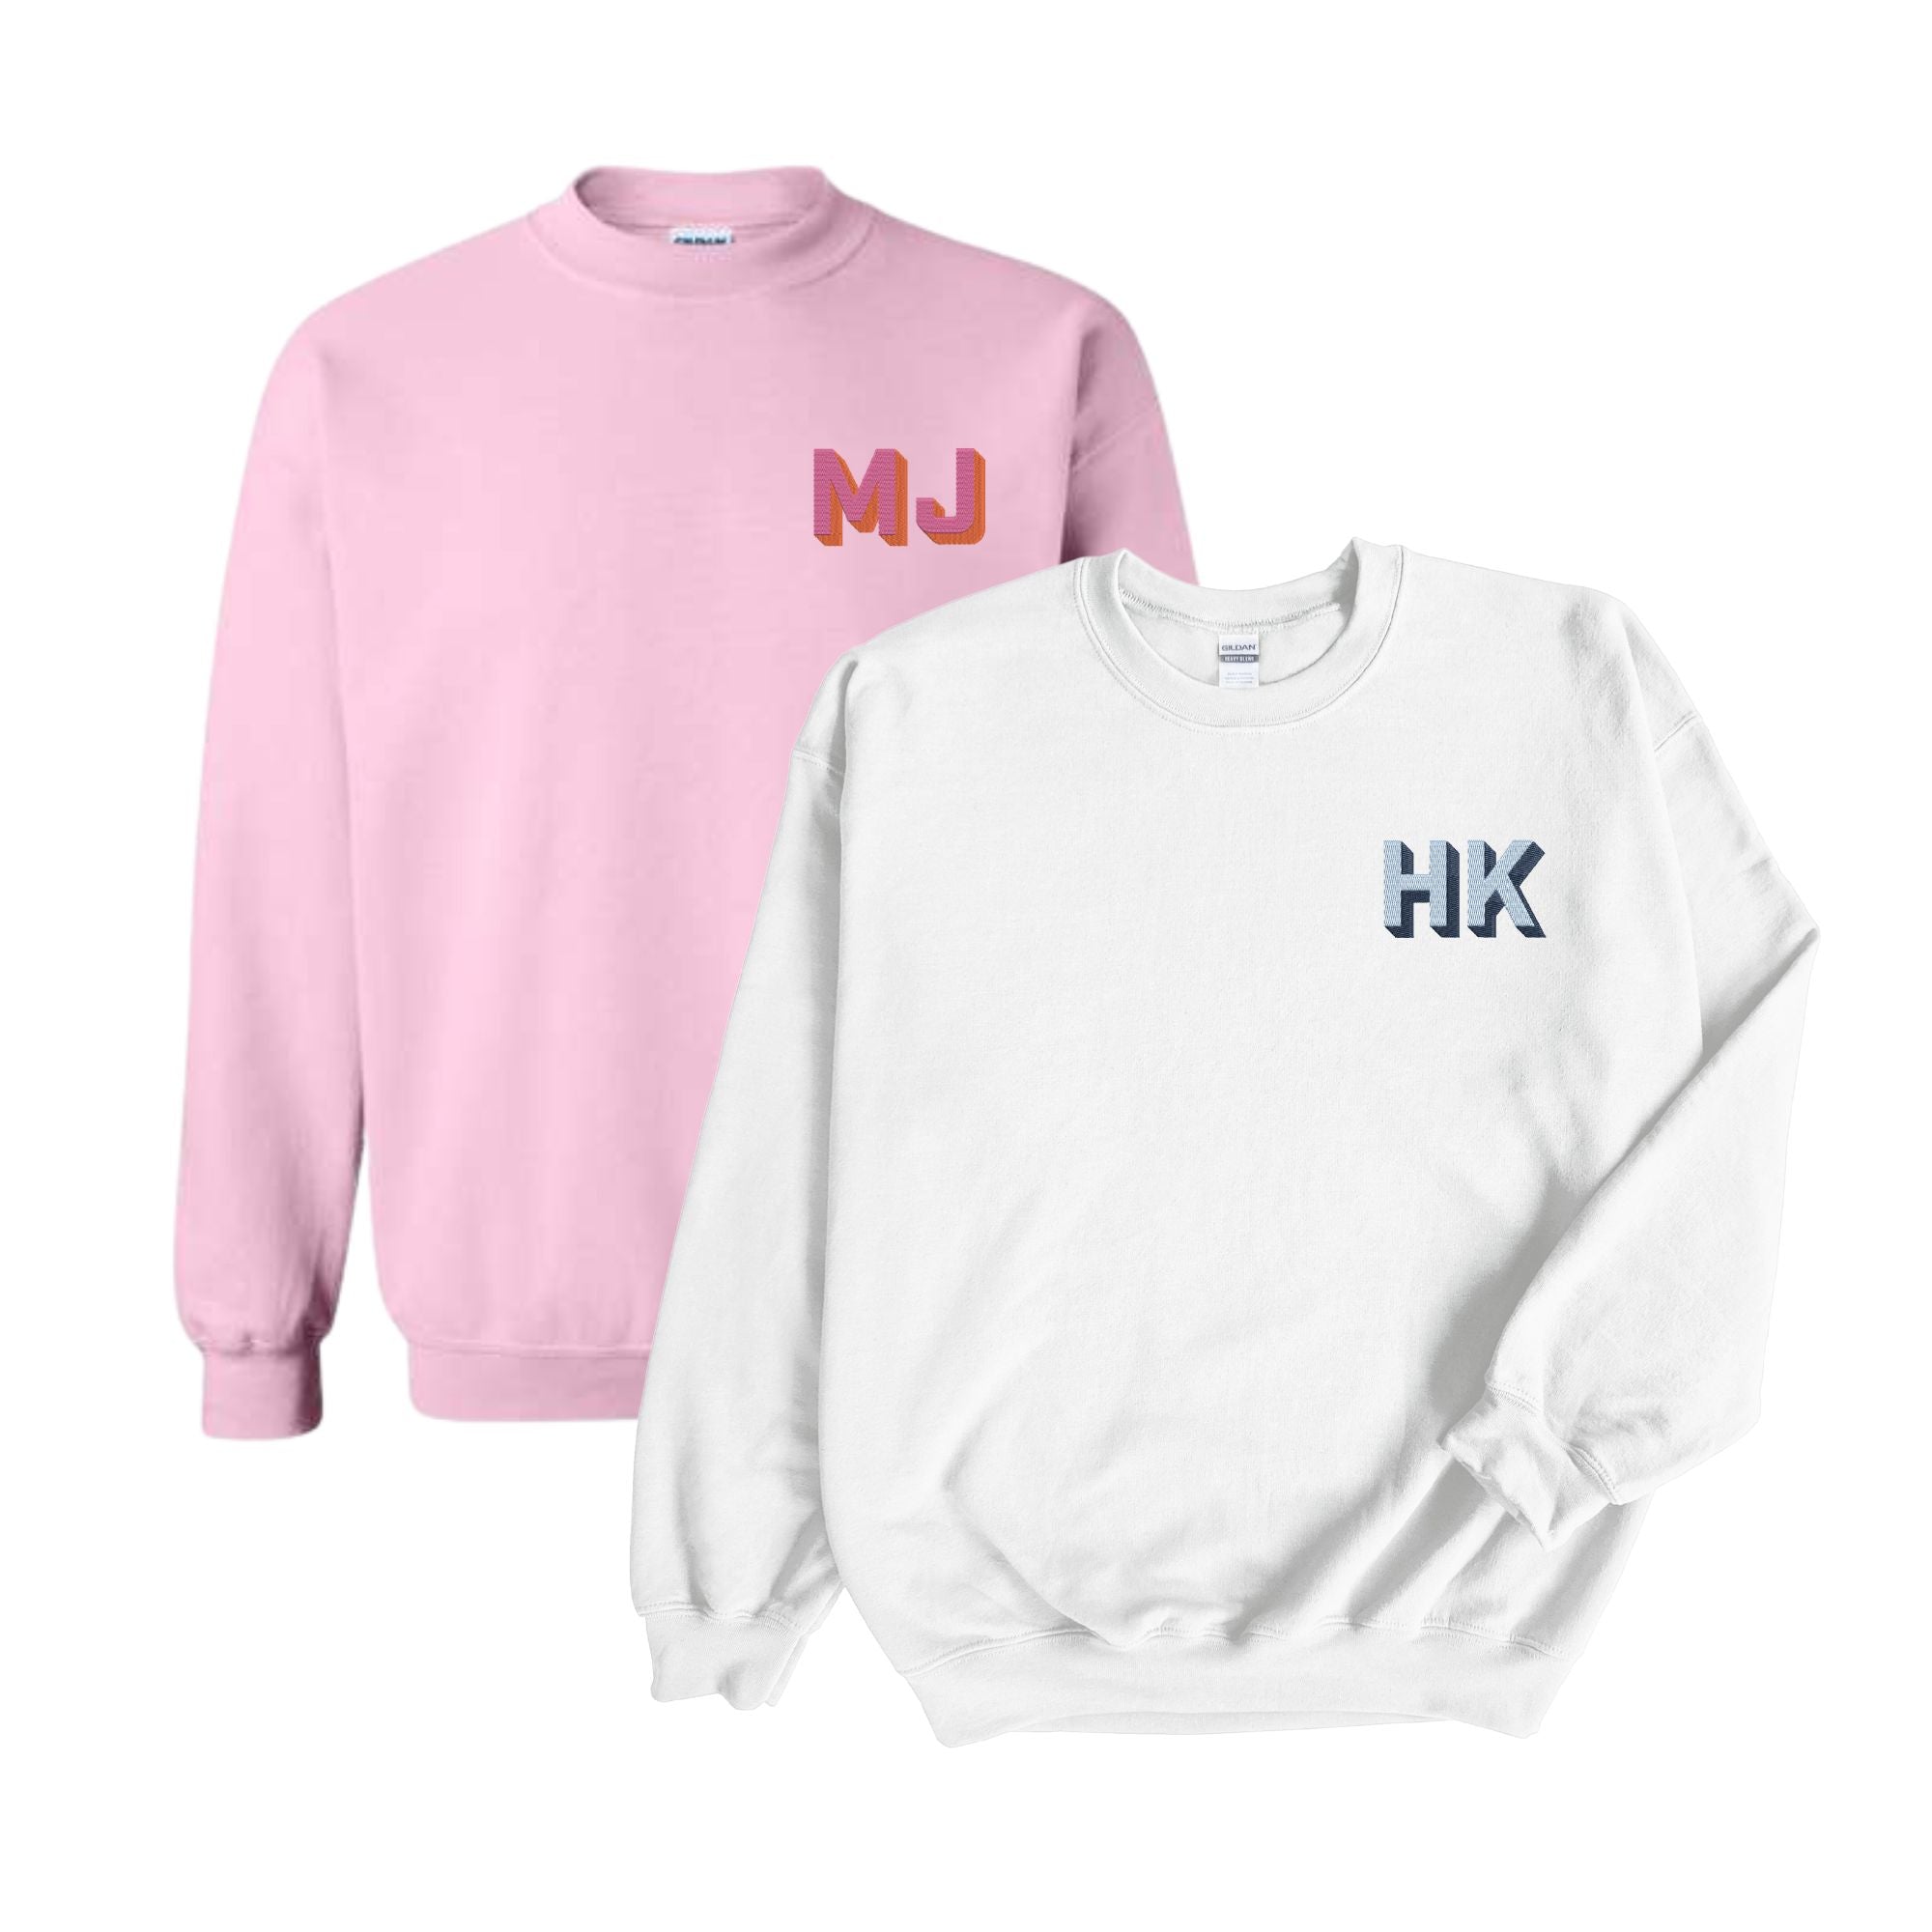 A white sweatshirt is customized with a blue embroidered monogram and a pink sweatshirt is embroidered with a pink and orange embroidered monogram.